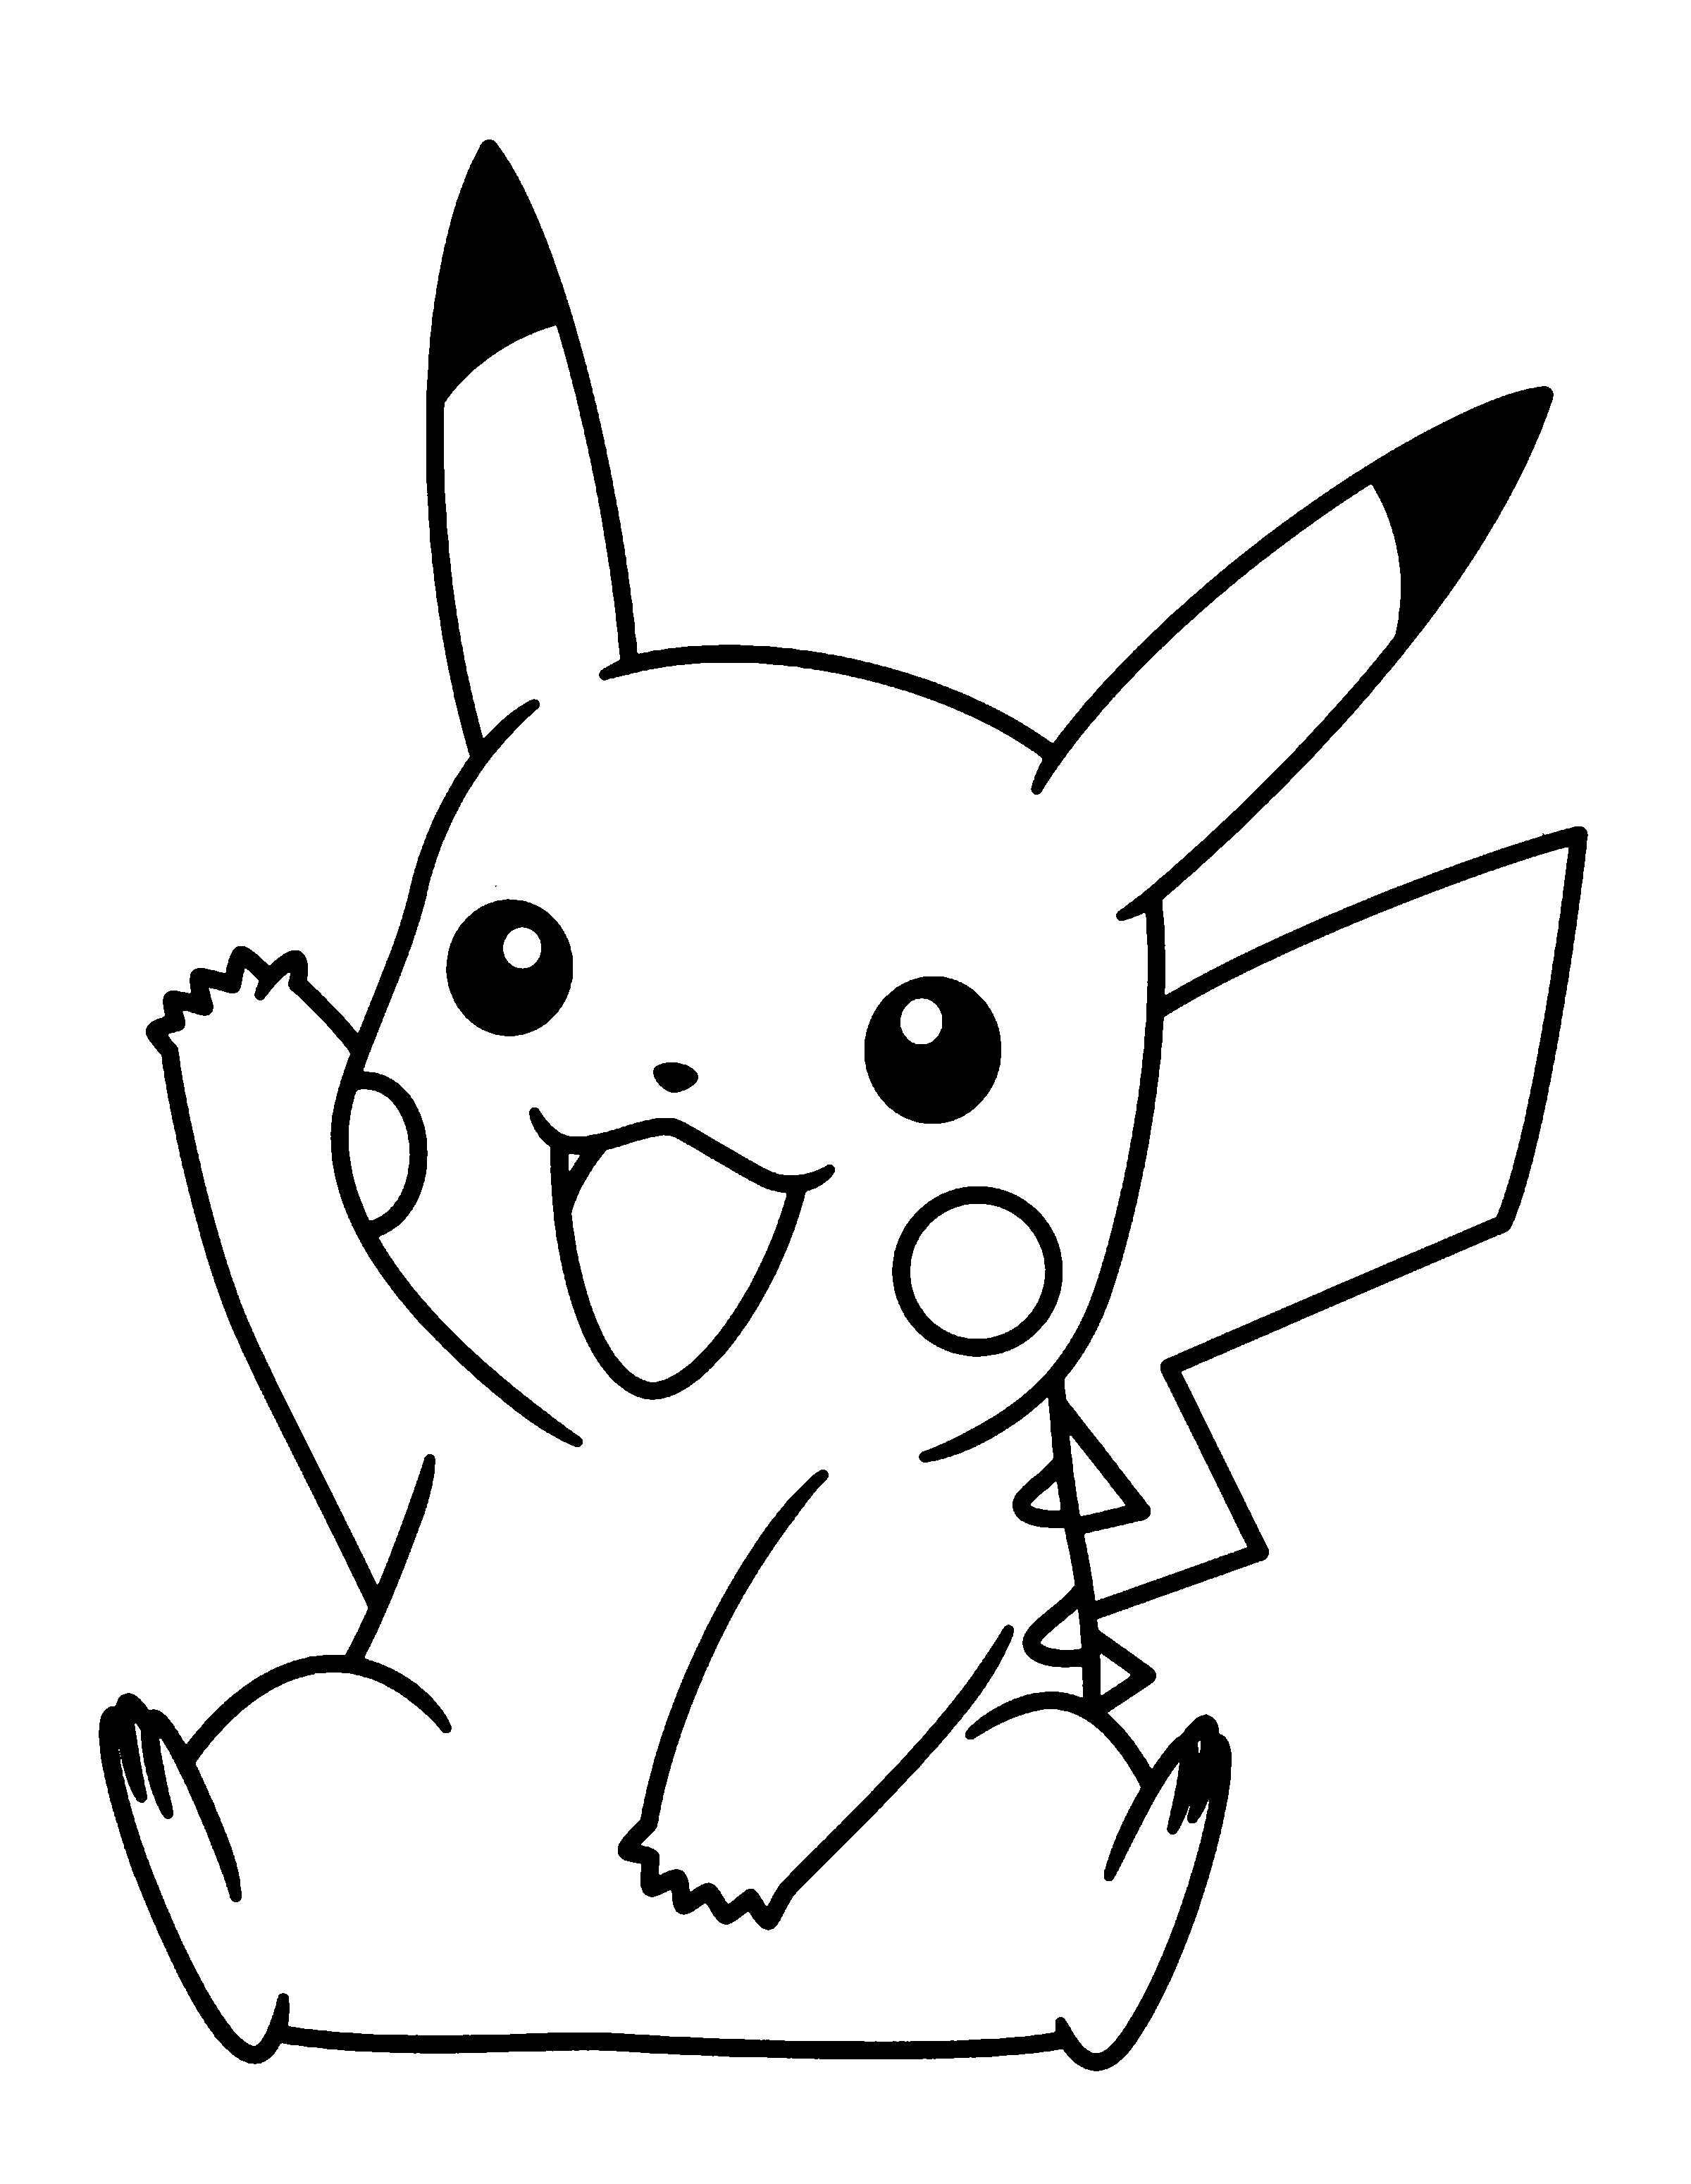 cute pikachu coloring pages pikachu coloring pages to download and print for free coloring cute pikachu pages 